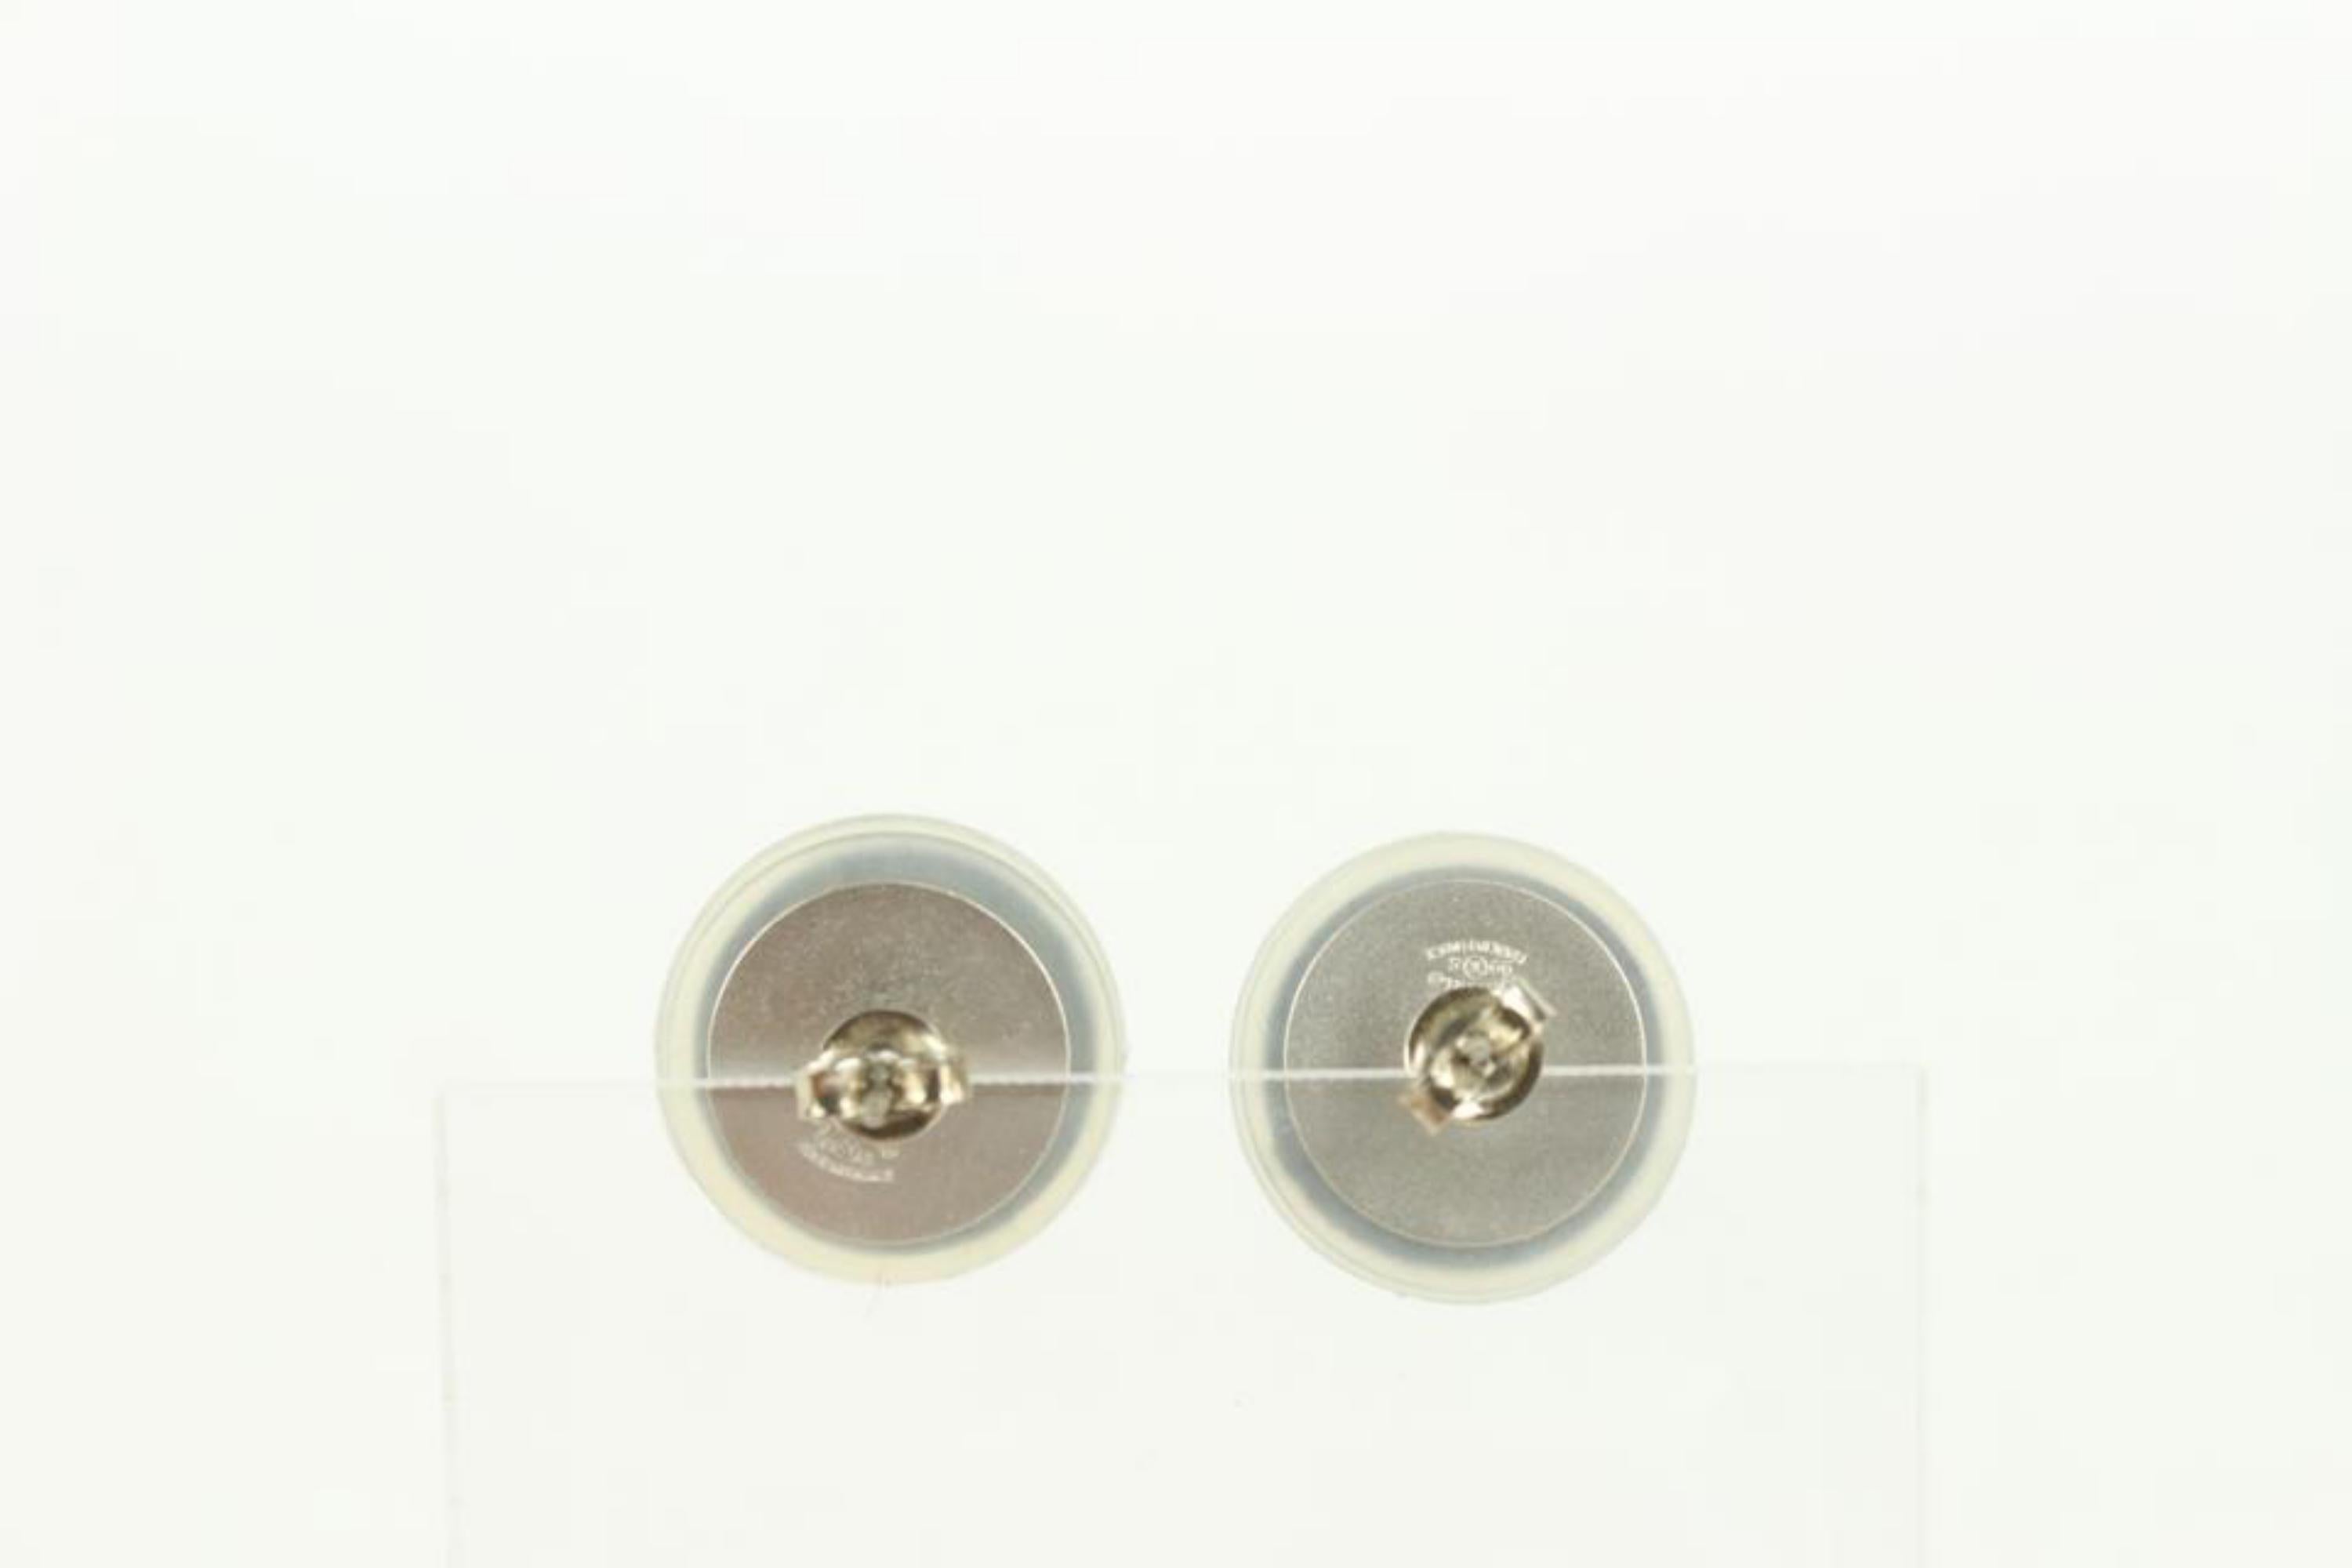 Chanel 99S Quilted Jelly CC Pierce Earrings 108c23 For Sale 6